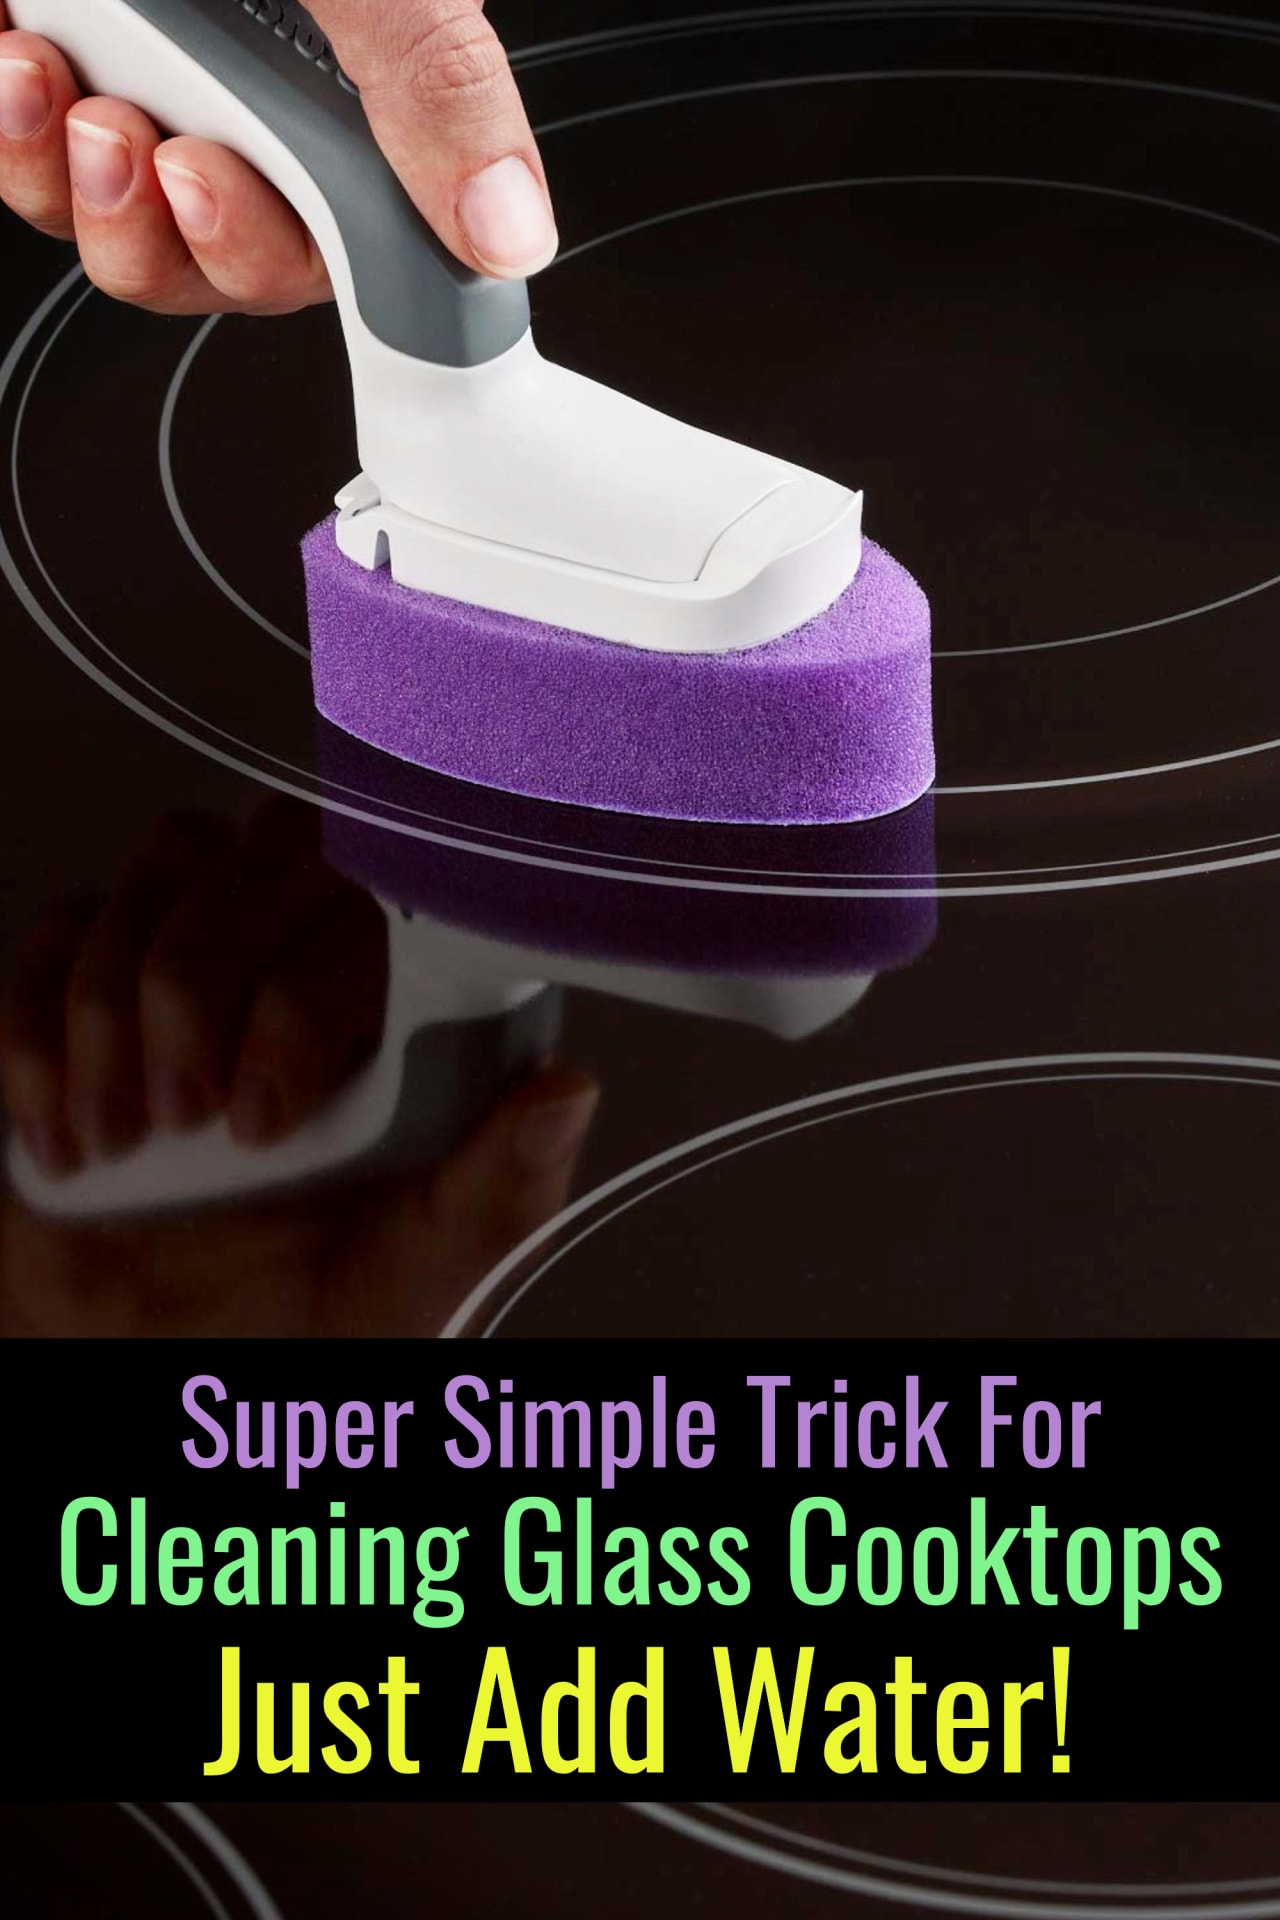 Clean glass cooktop the EASY way - this glass stove top cleaner is cheap and easy to use - and it works!